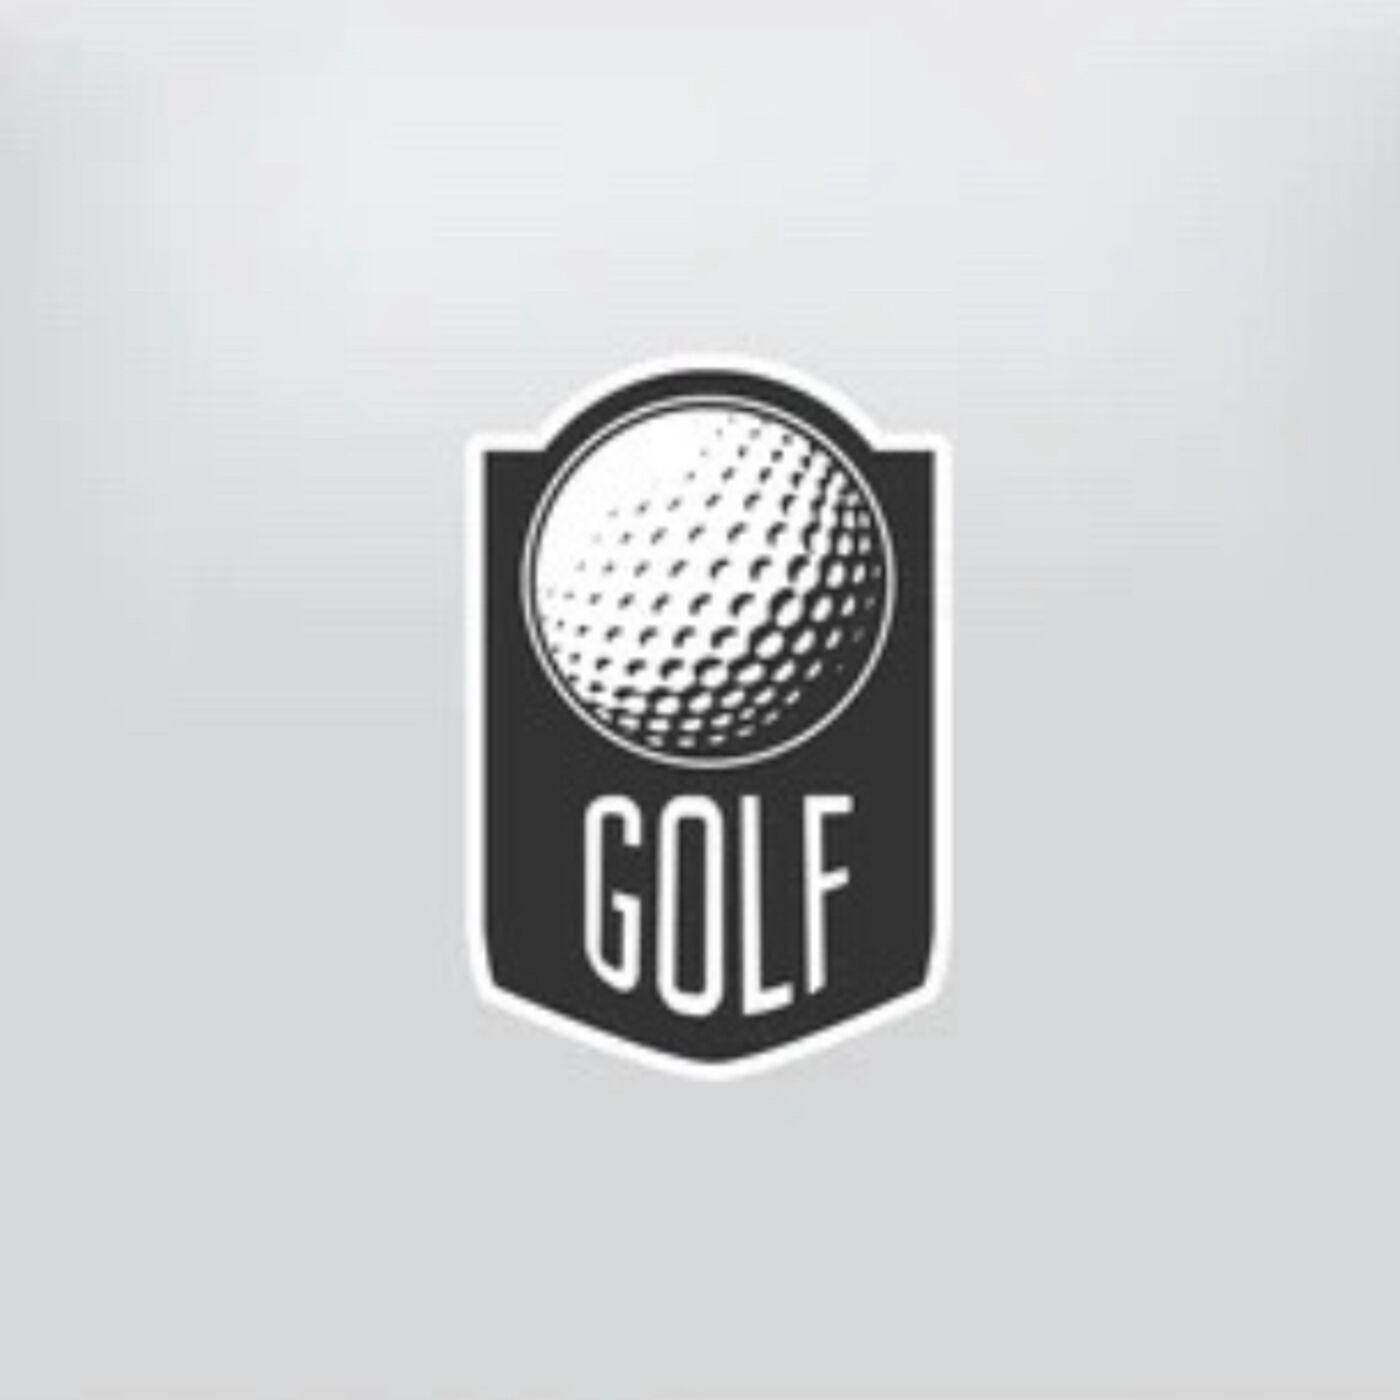 Turn Dogs Golf Podcast